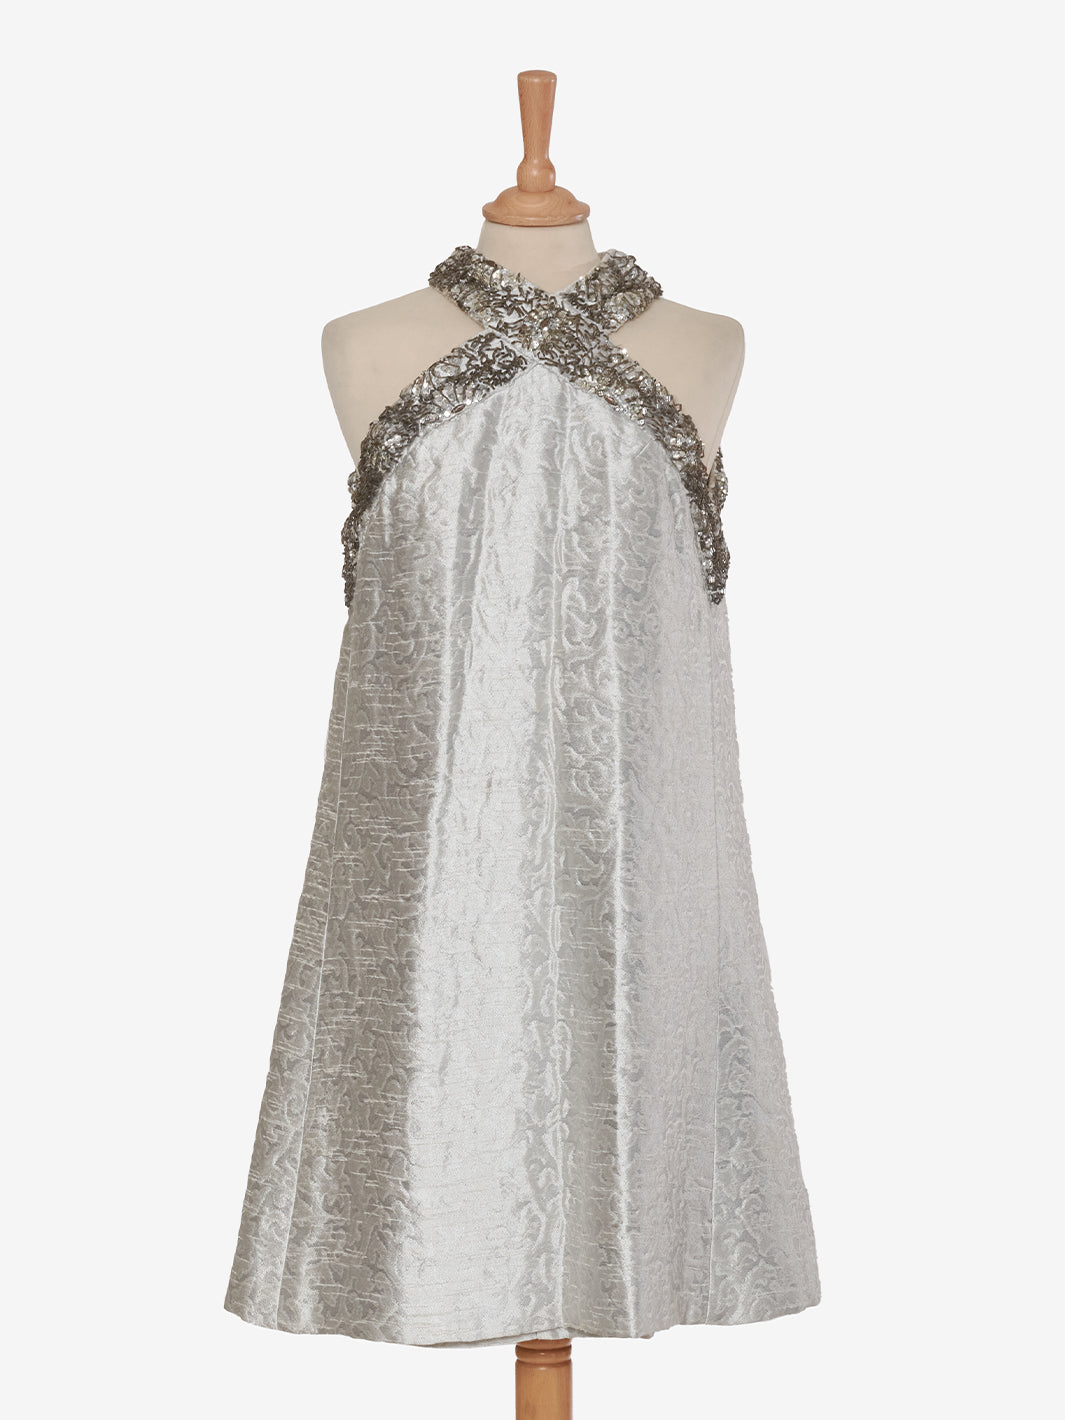 Vintage trapeze dress with American neckline and silver sequins - '60s